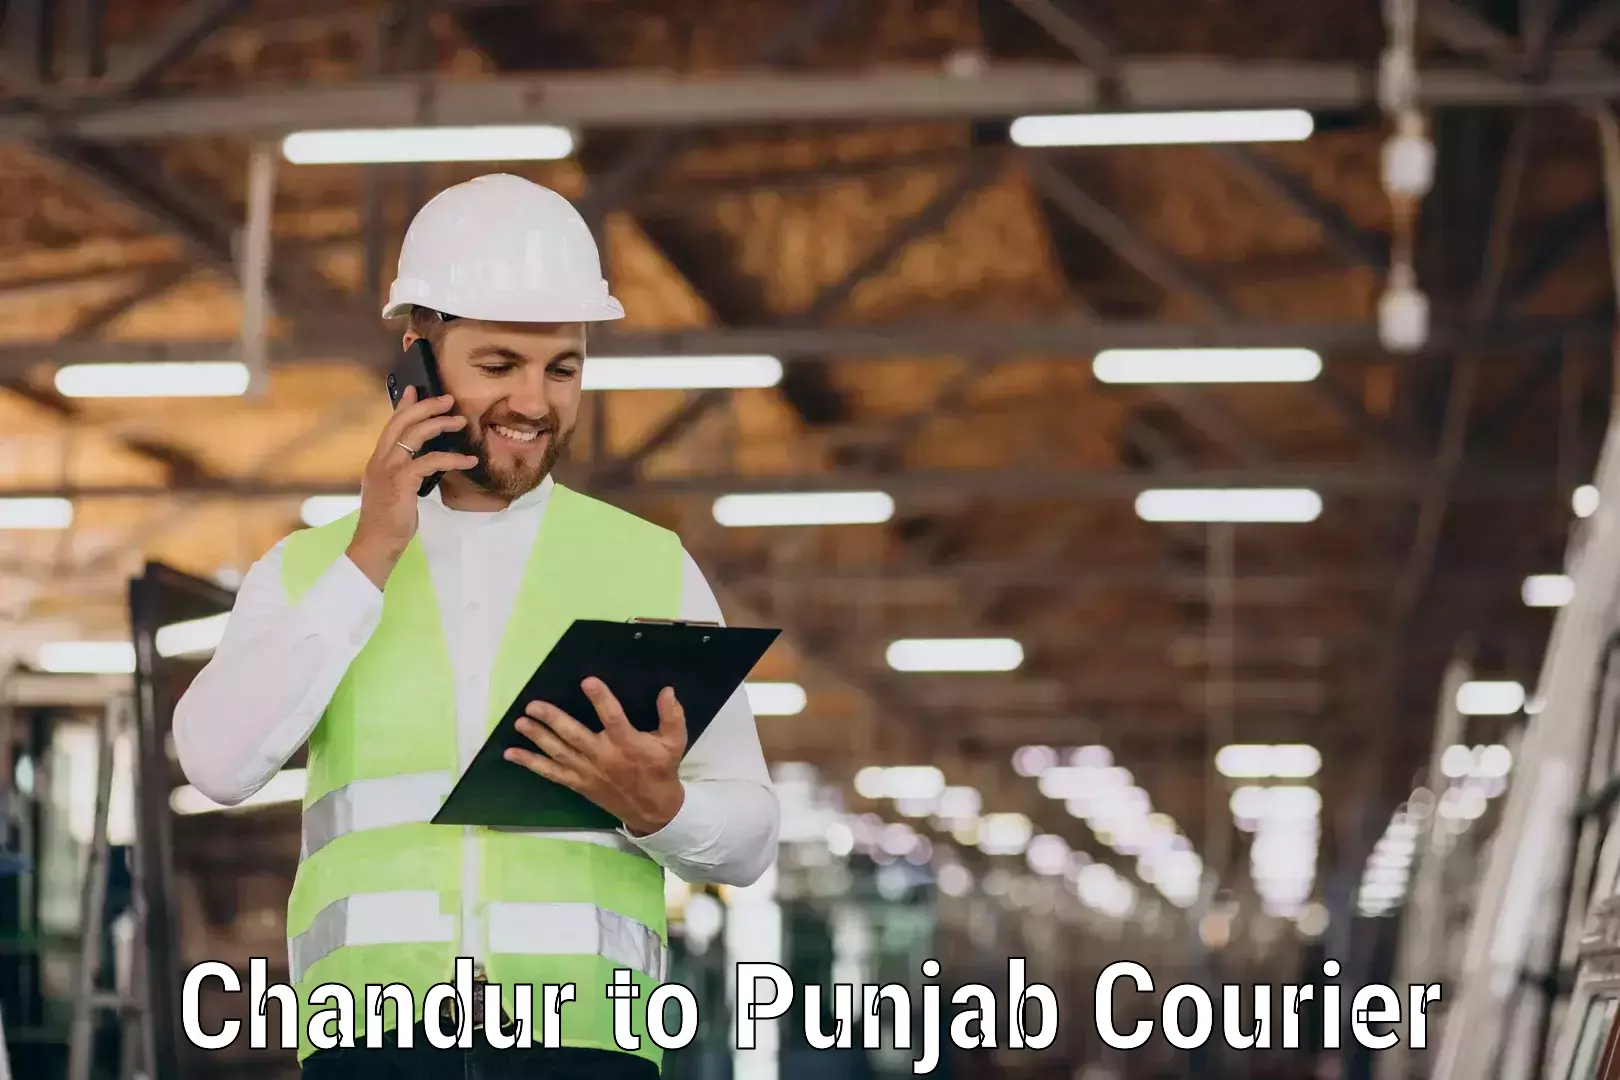 Global courier networks Chandur to Pathankot